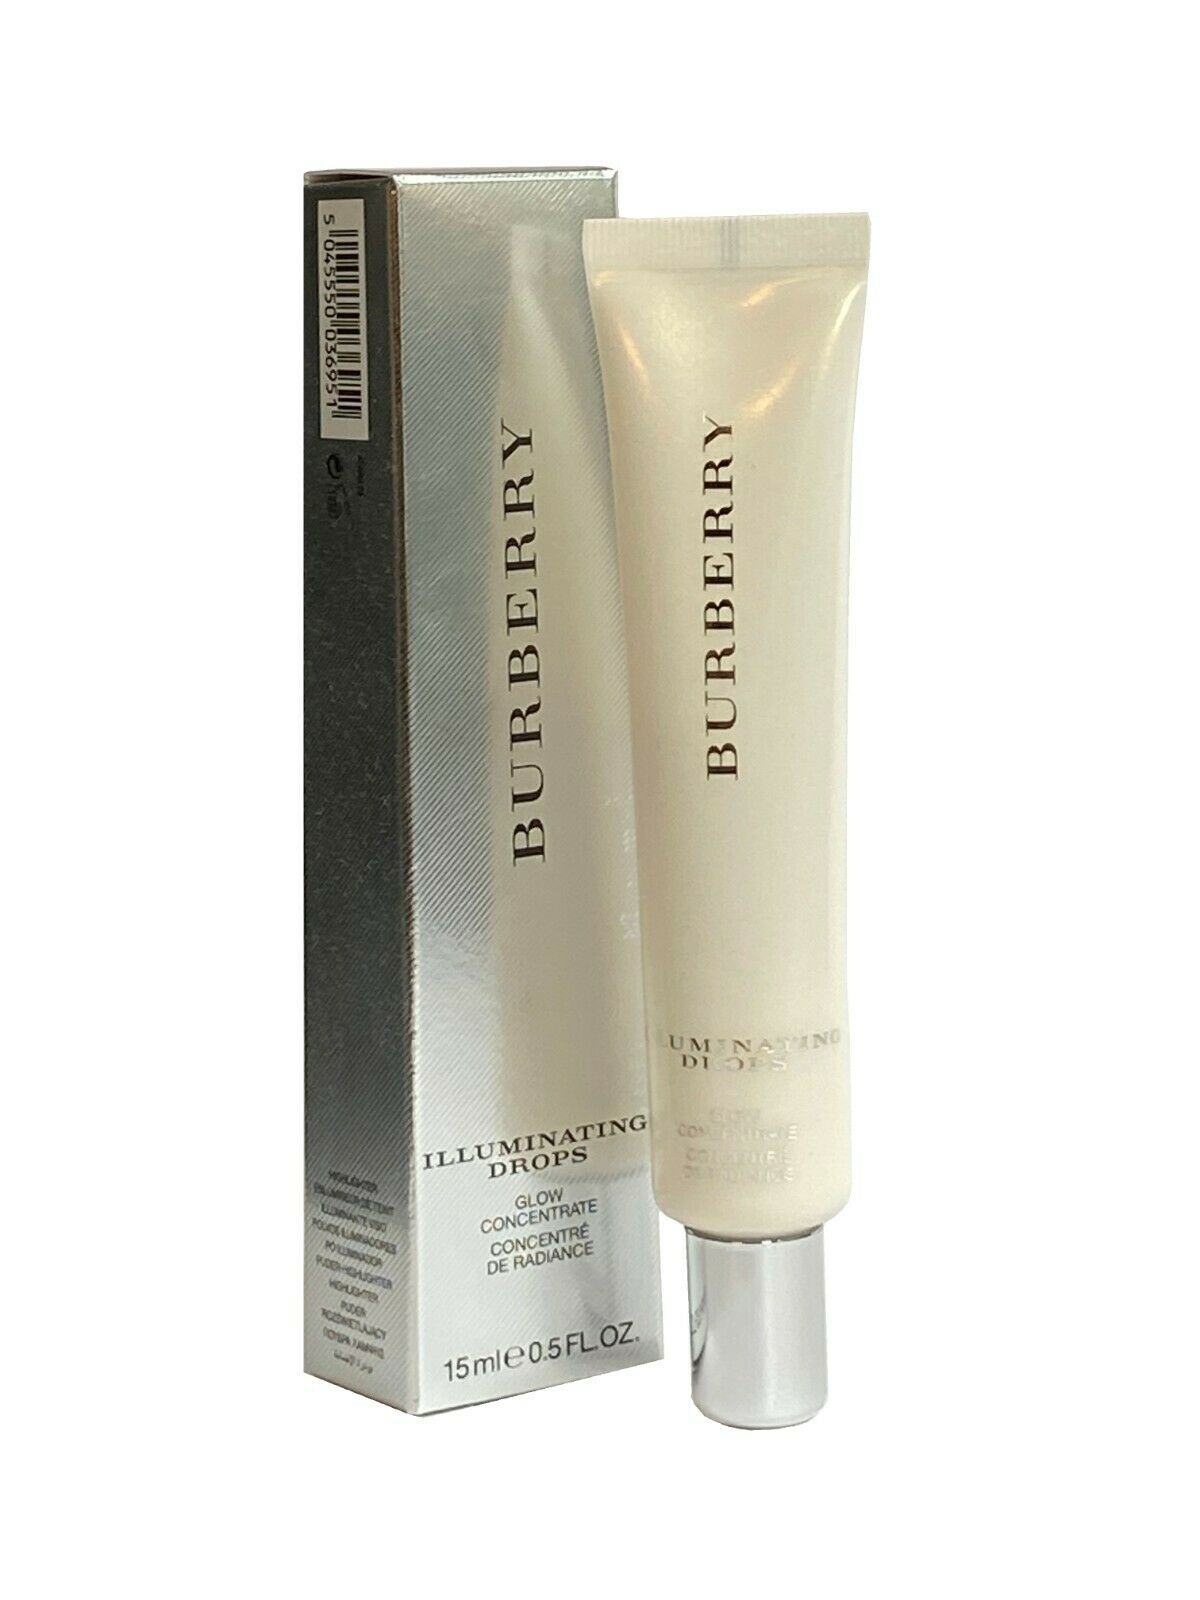 Burberry Illuminating Drops Glow Concentrate - No.01